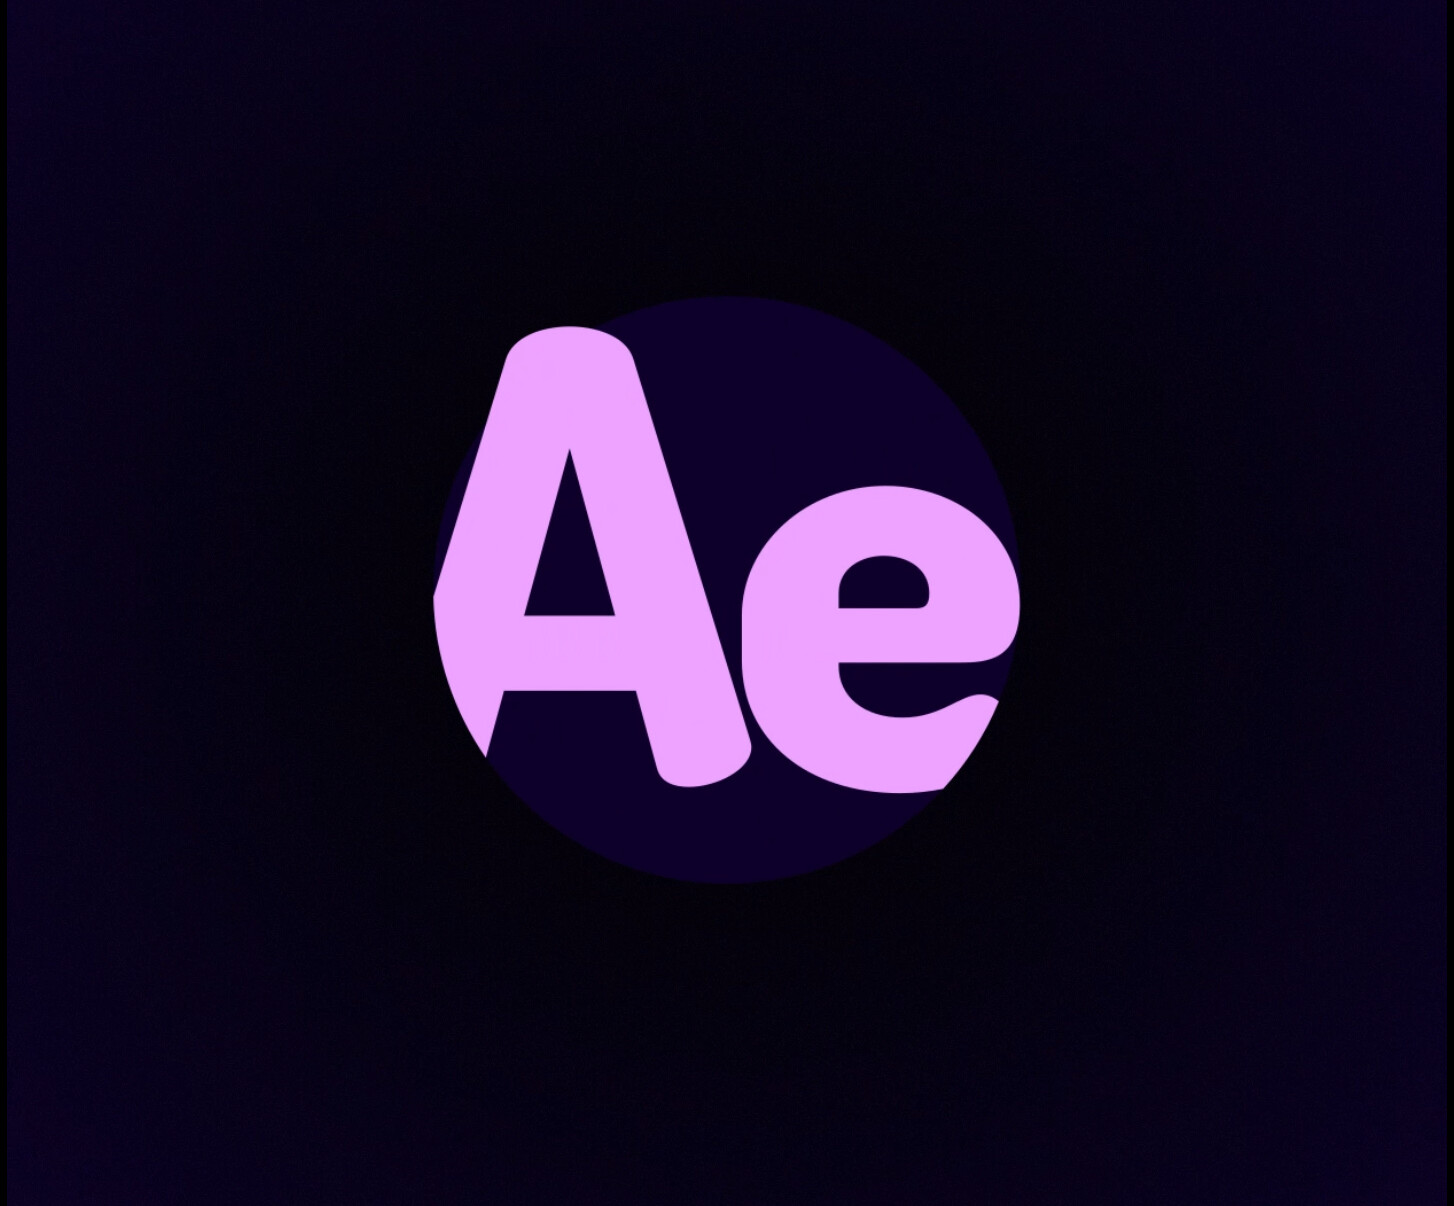 Adobe after effects edit templates - Graphic Design Stack Exchange